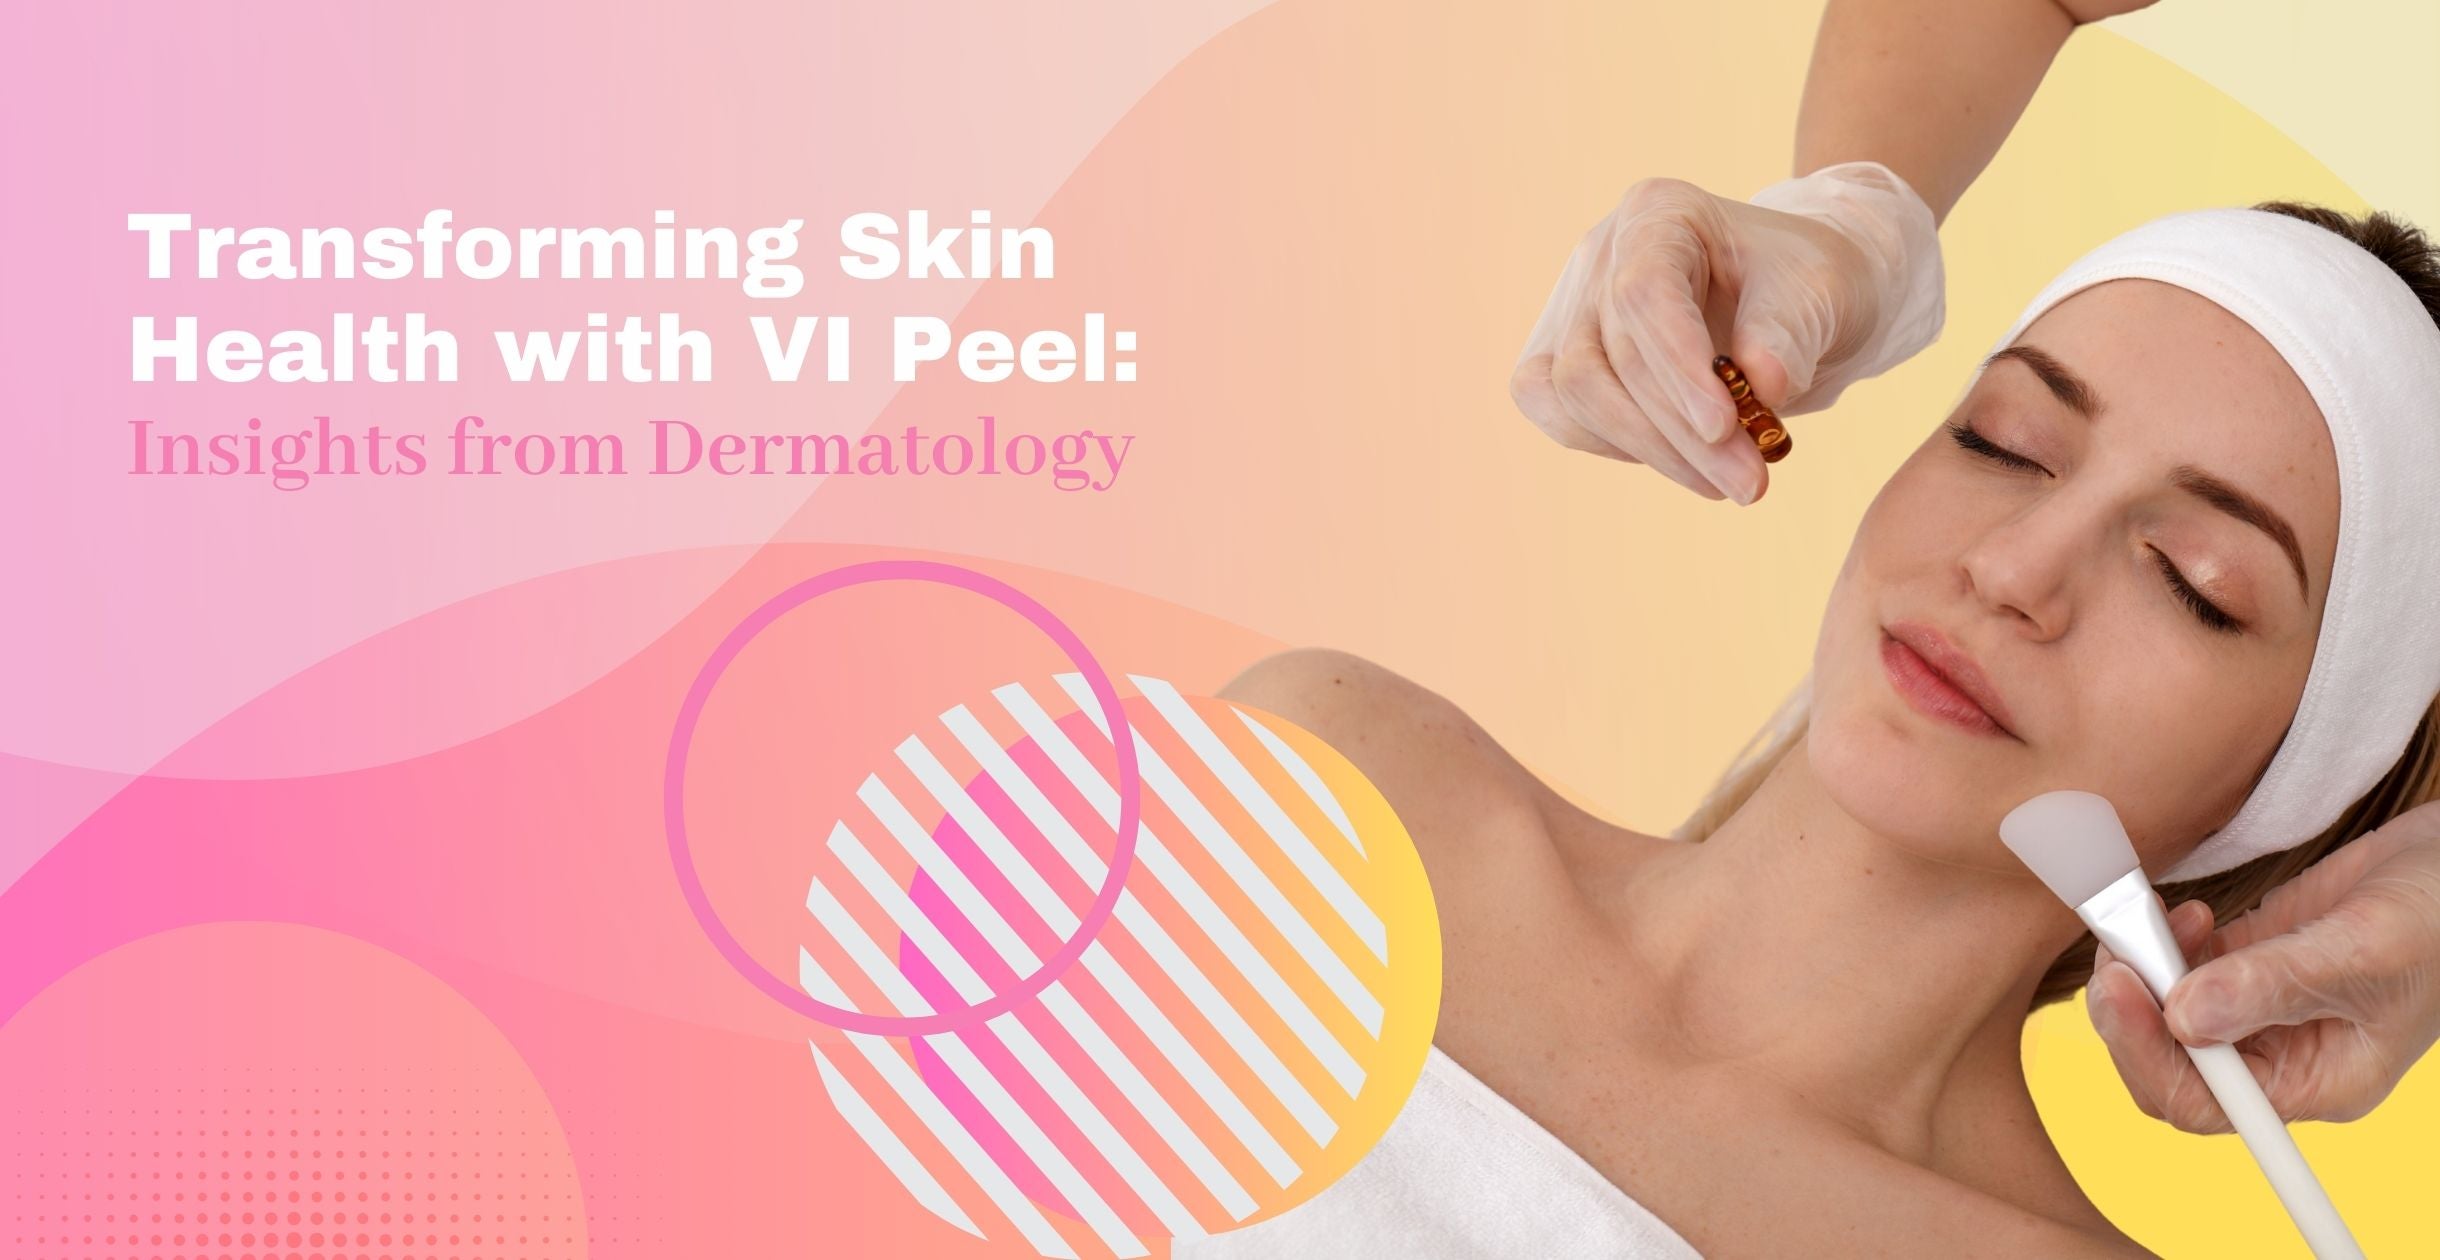 Transforming Skin Health with VI Peel: Insights from Dermatology